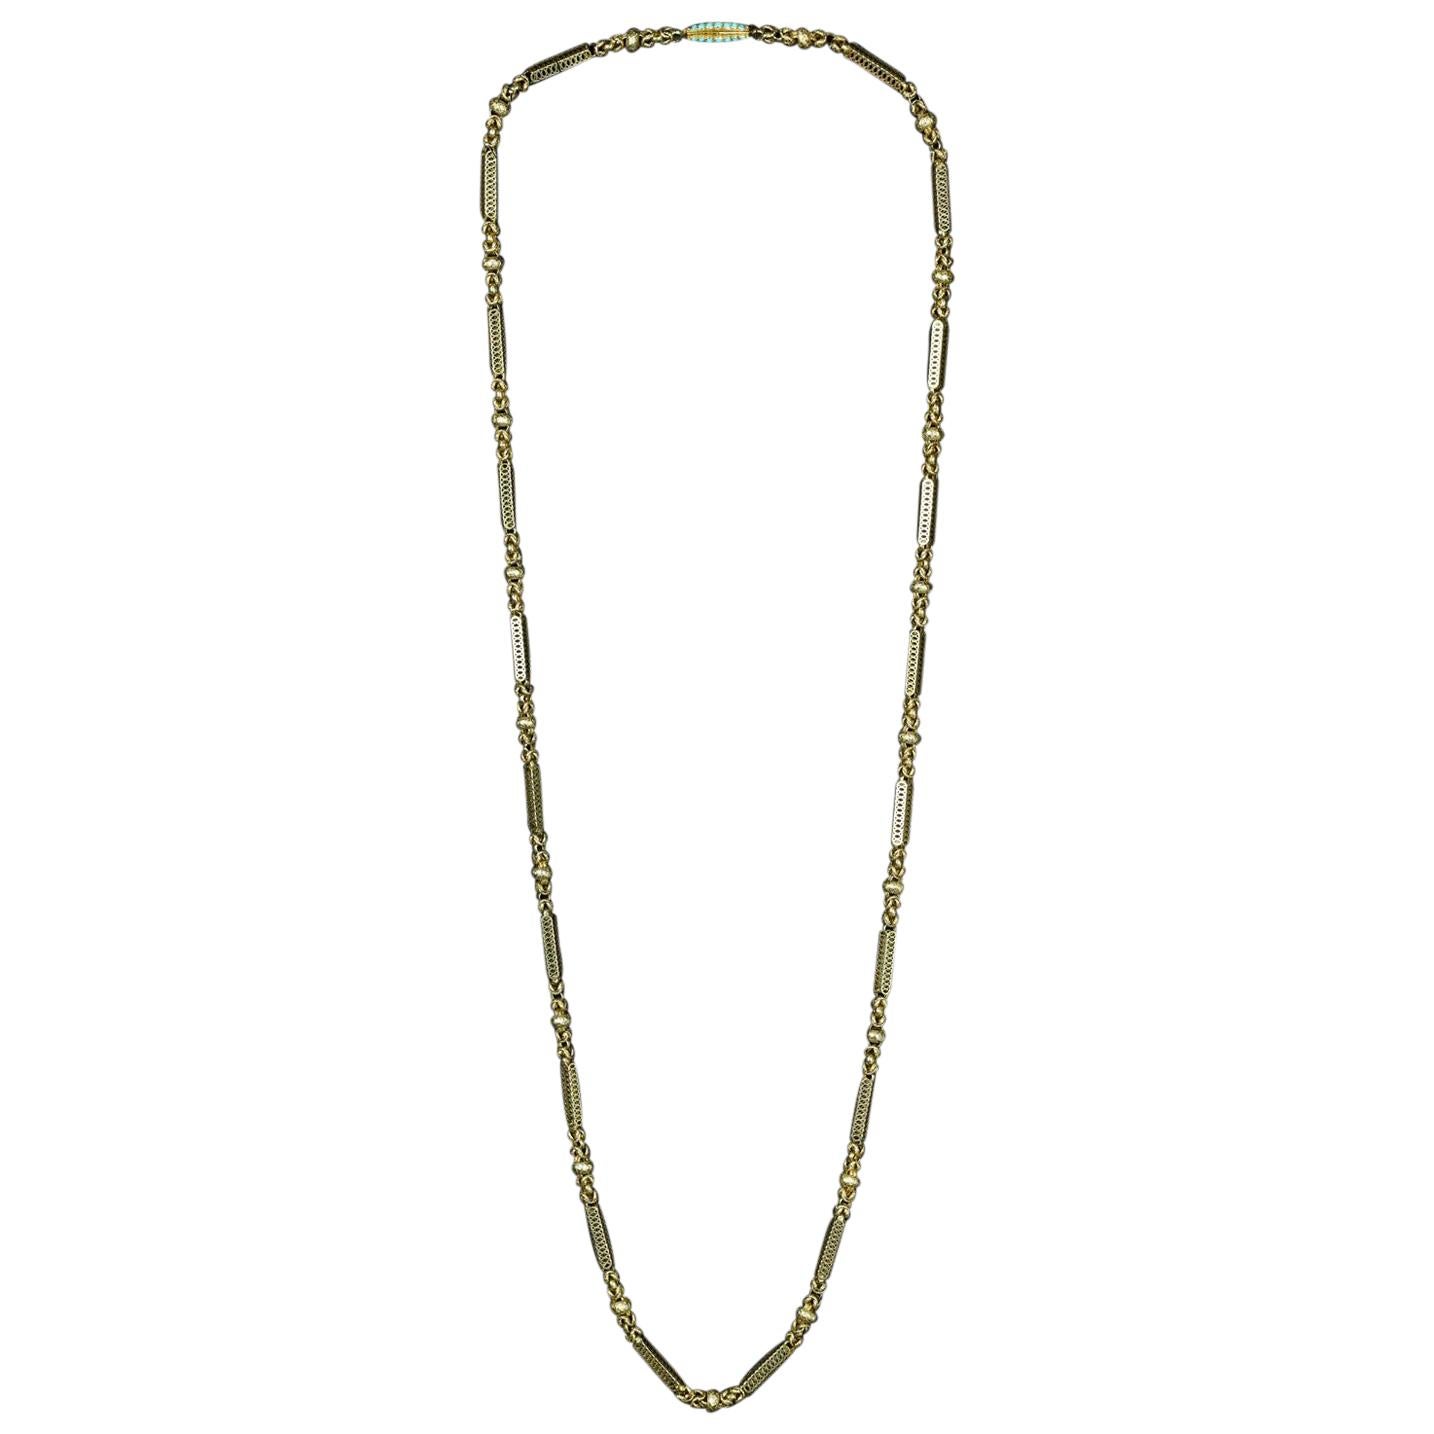 Wonderful Antique Georgian Gold Long Chain with Turquoise Clasp, circa 1830